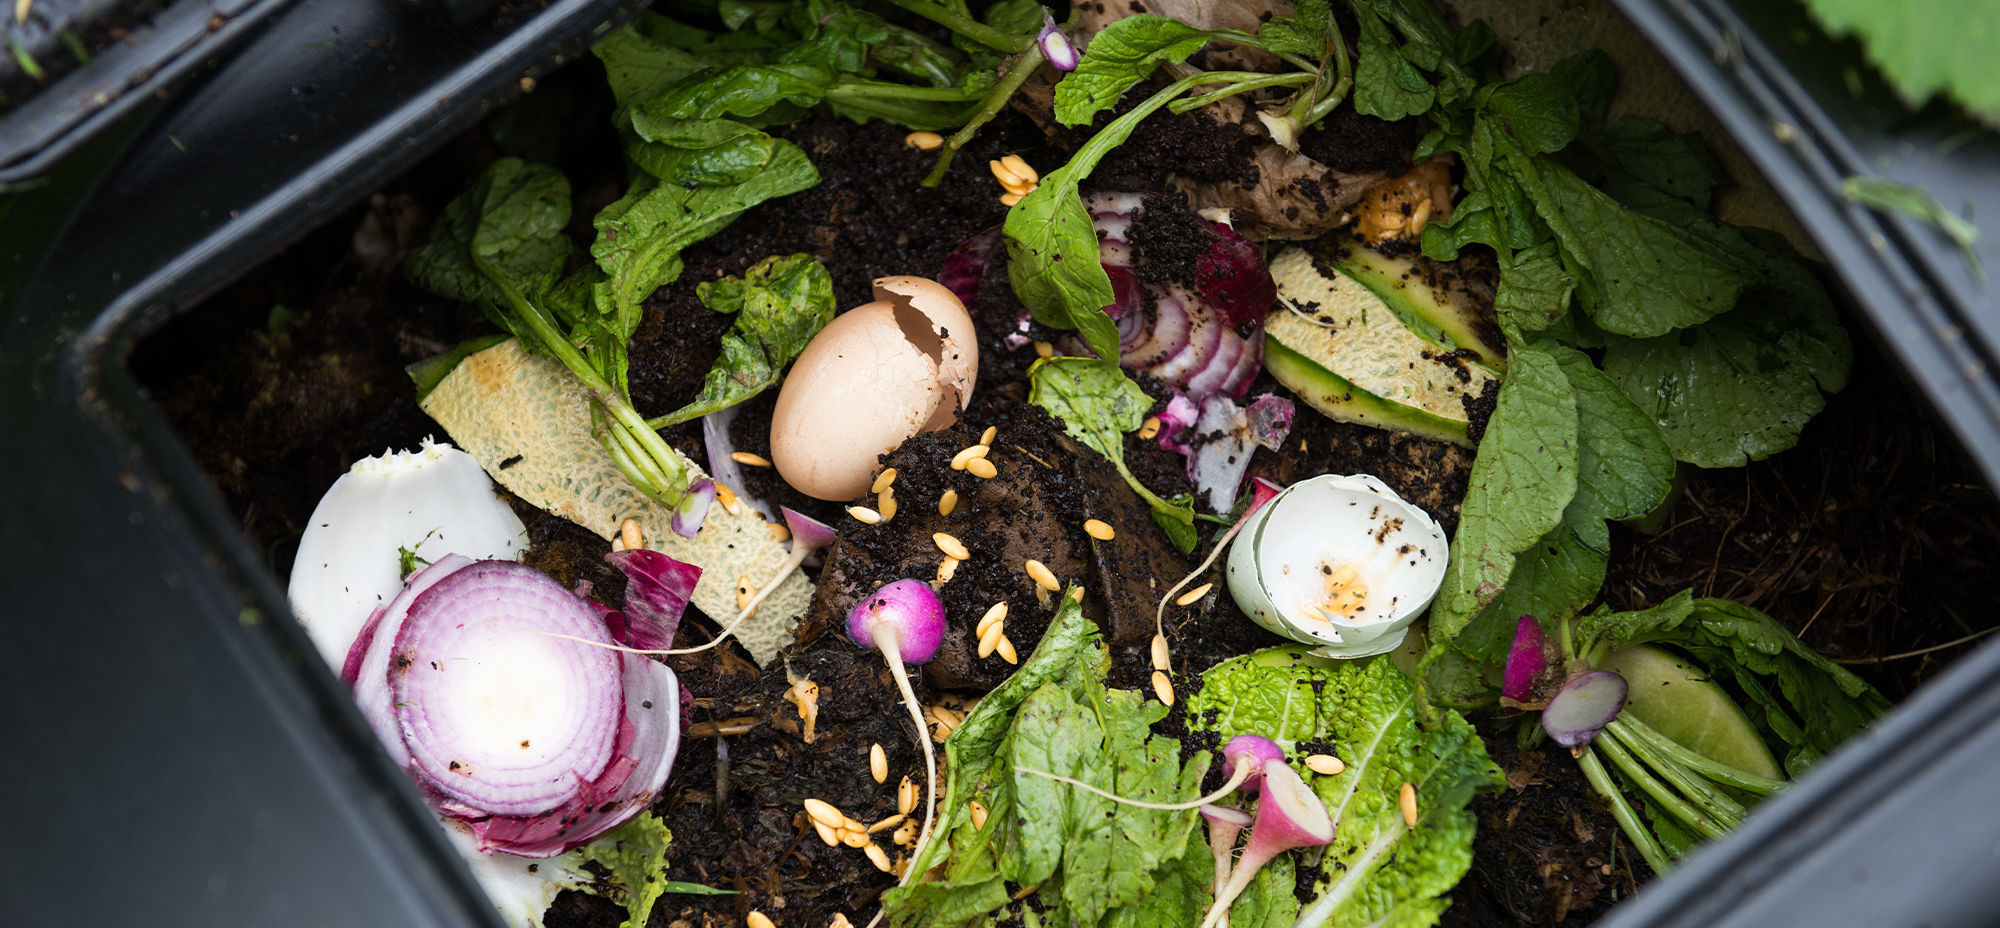 Image of food compost